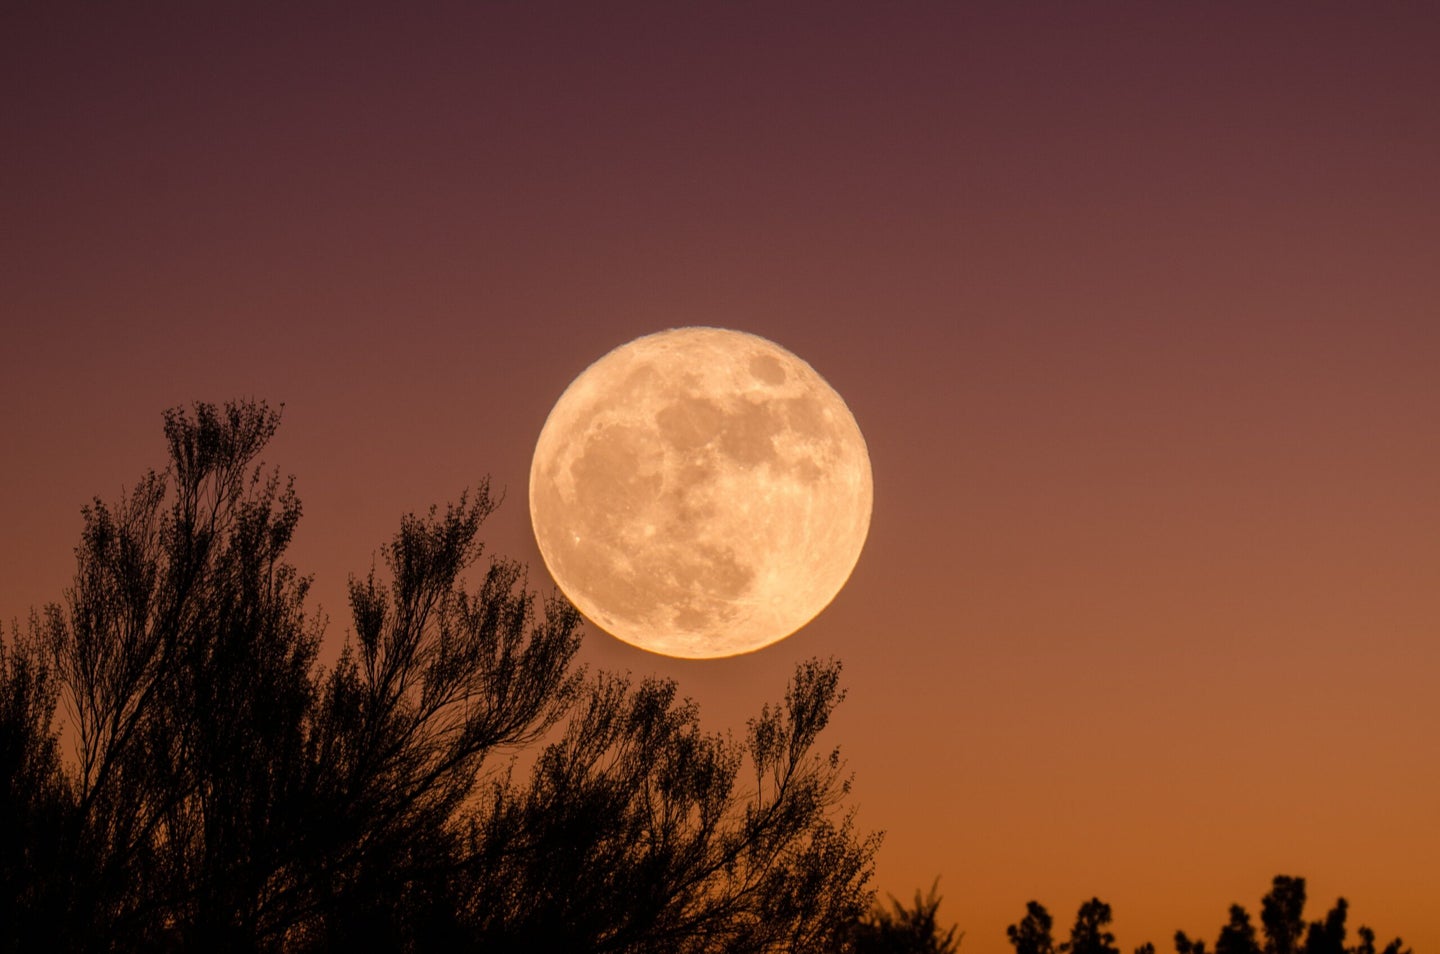 A large, yellow moon rises over the branches of a tree.